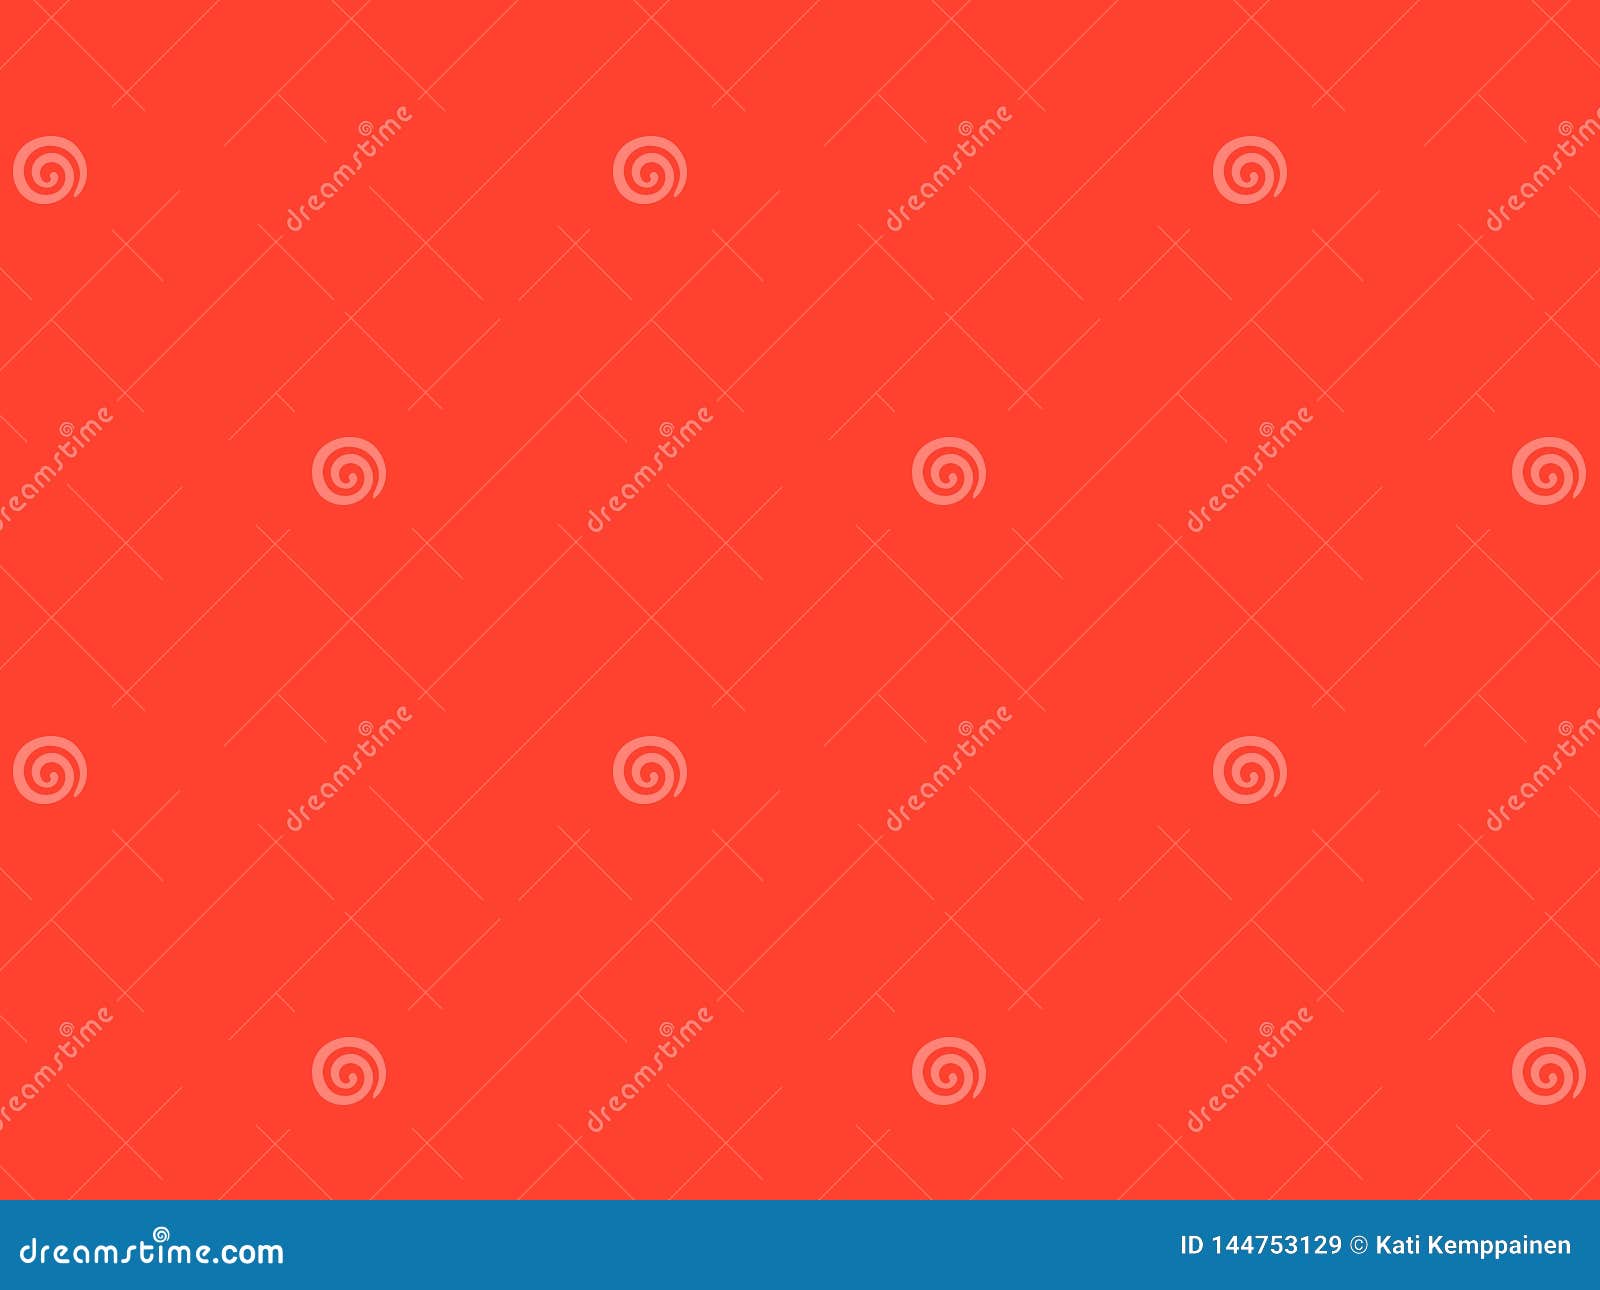 Plain Red Wallpapers  Top Free Plain Red Backgrounds  WallpaperAccess